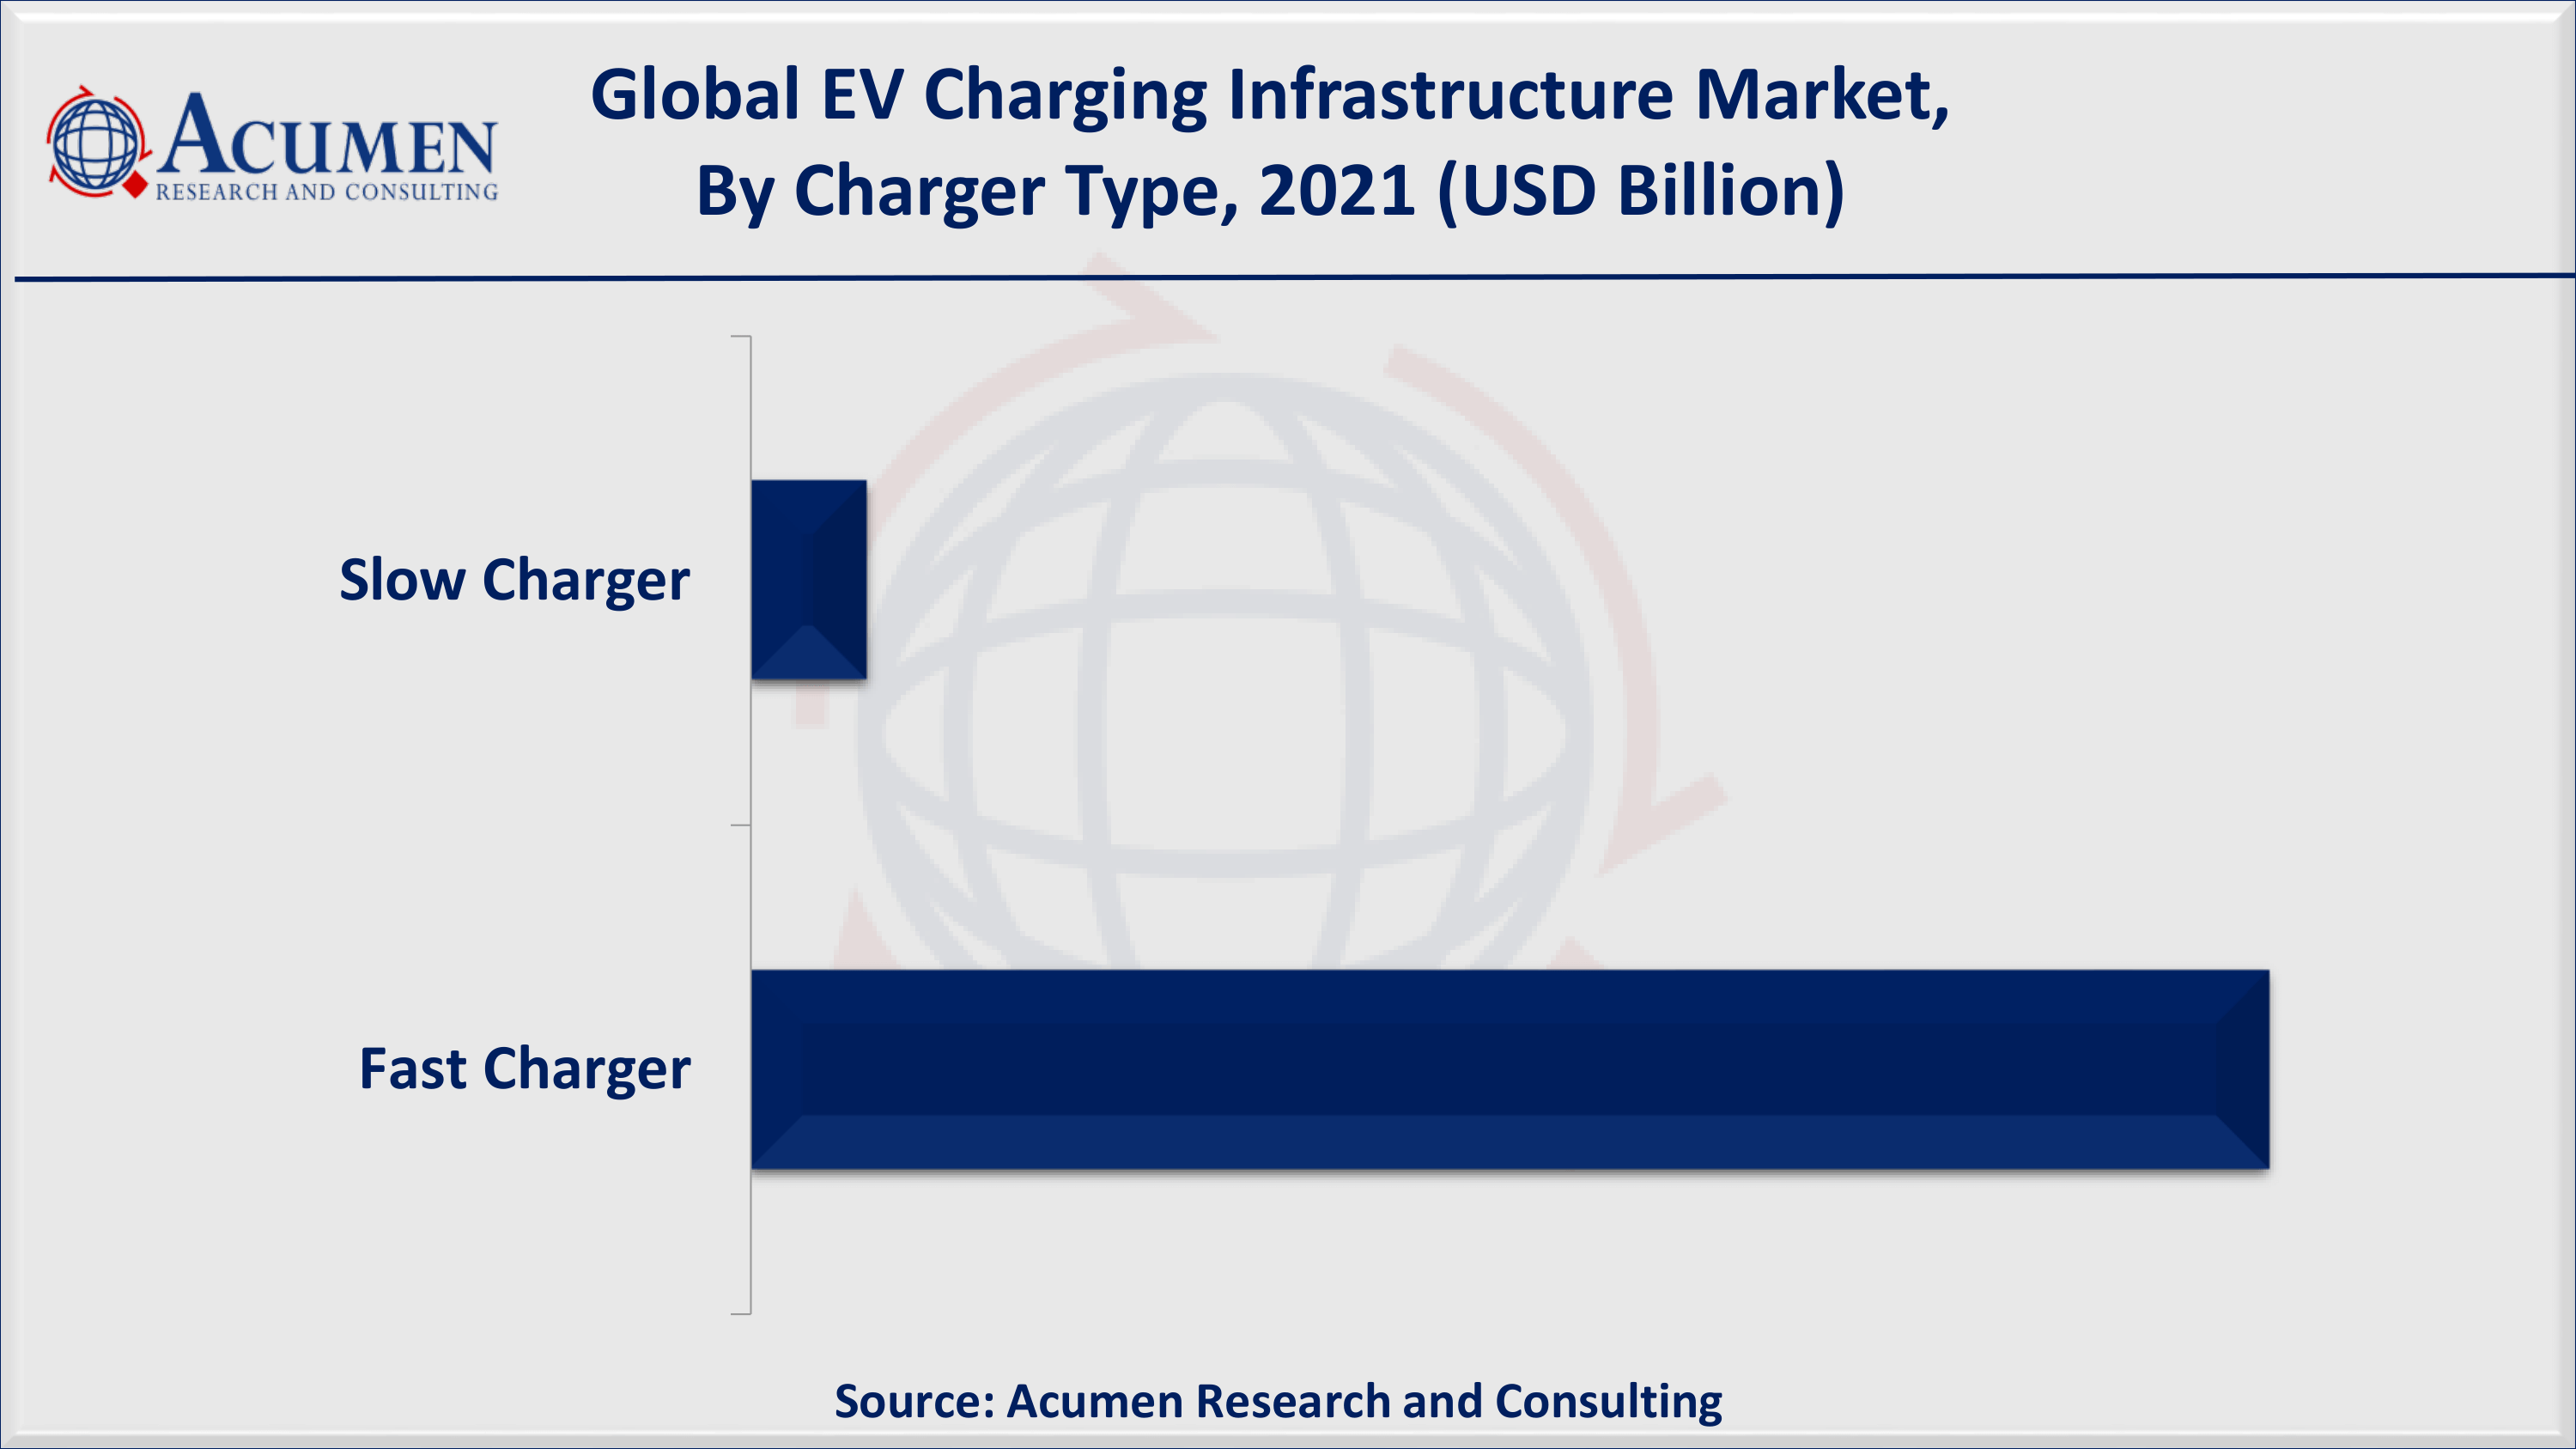 Based on charger type, fast charger accounted for over 92% of the overall market share in 2021